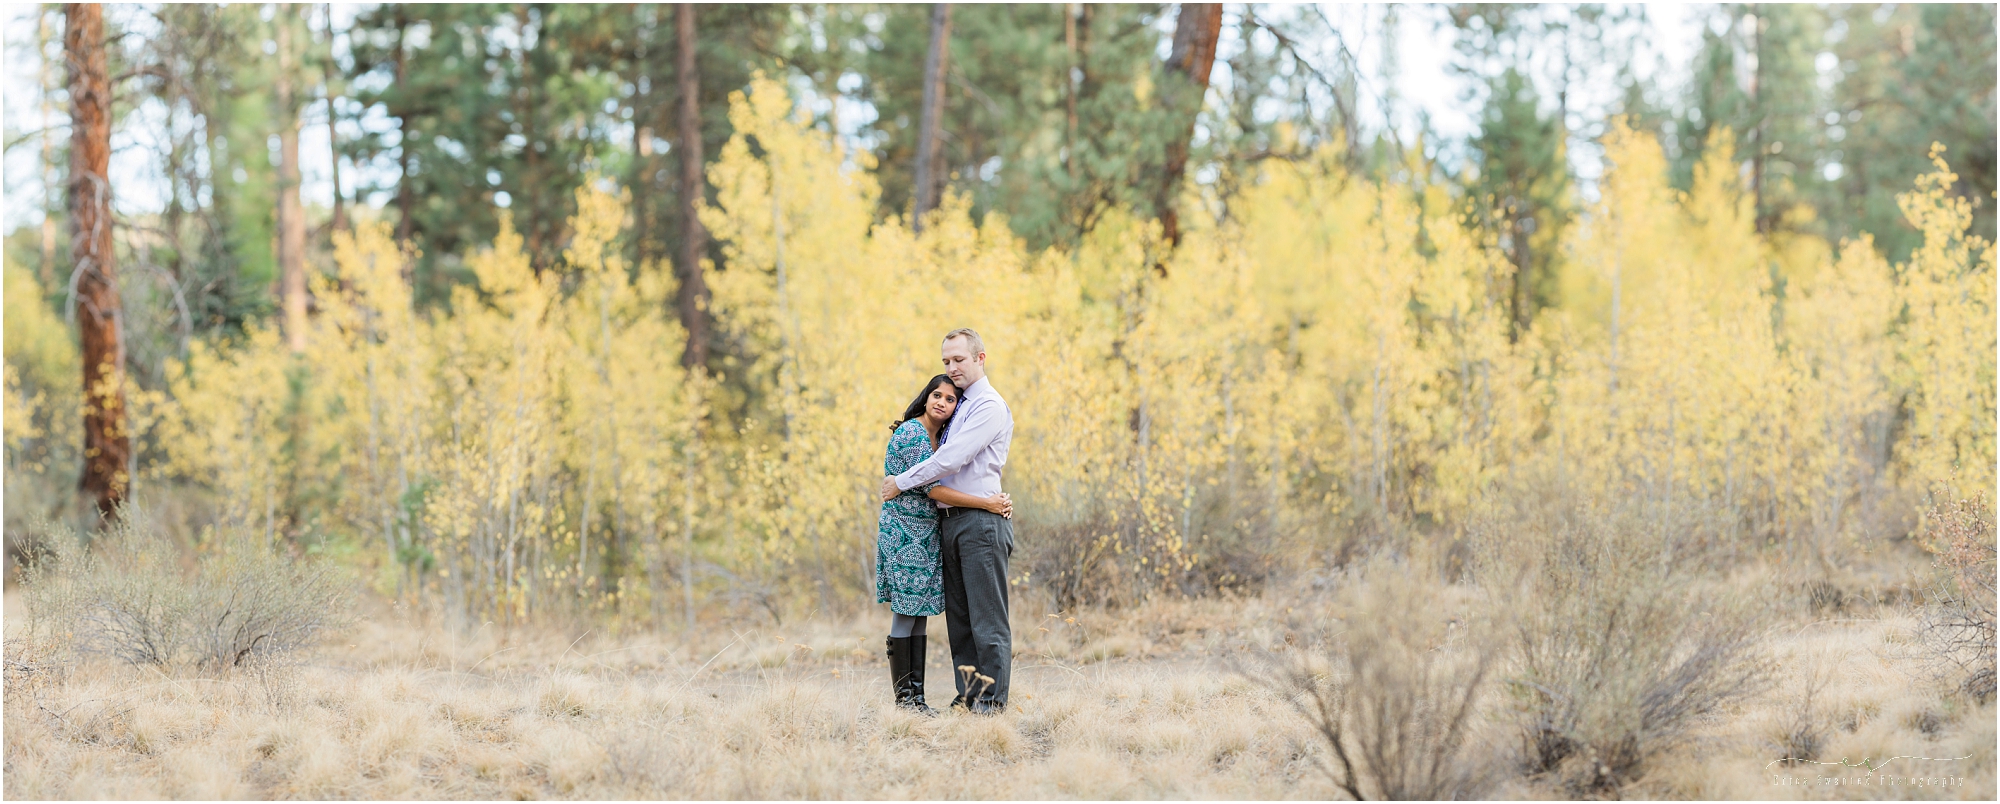 The aspen trees were in their full golden glory at this Shevlin Park fall engagement photography session in Bend, OR.